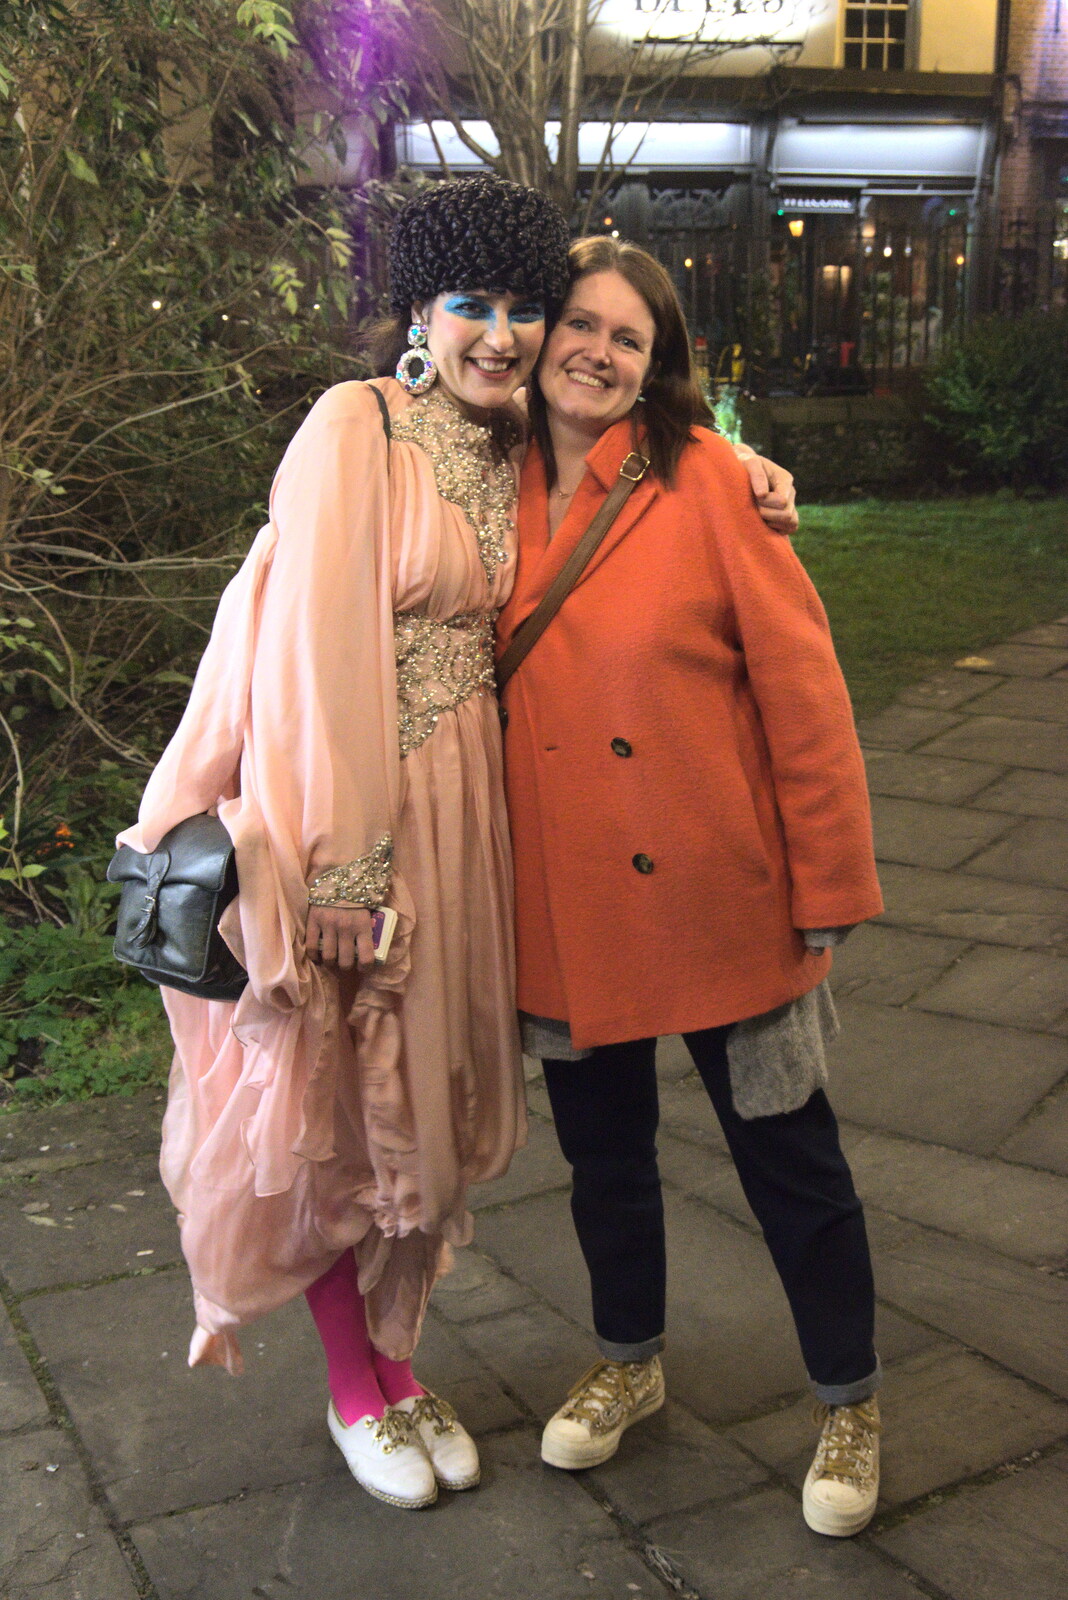 Vanity Fairy and Let's Eat Grandma, Arts Centre, Norwich - 26th January 2022: We meet up with Daisy outside the Arts Center